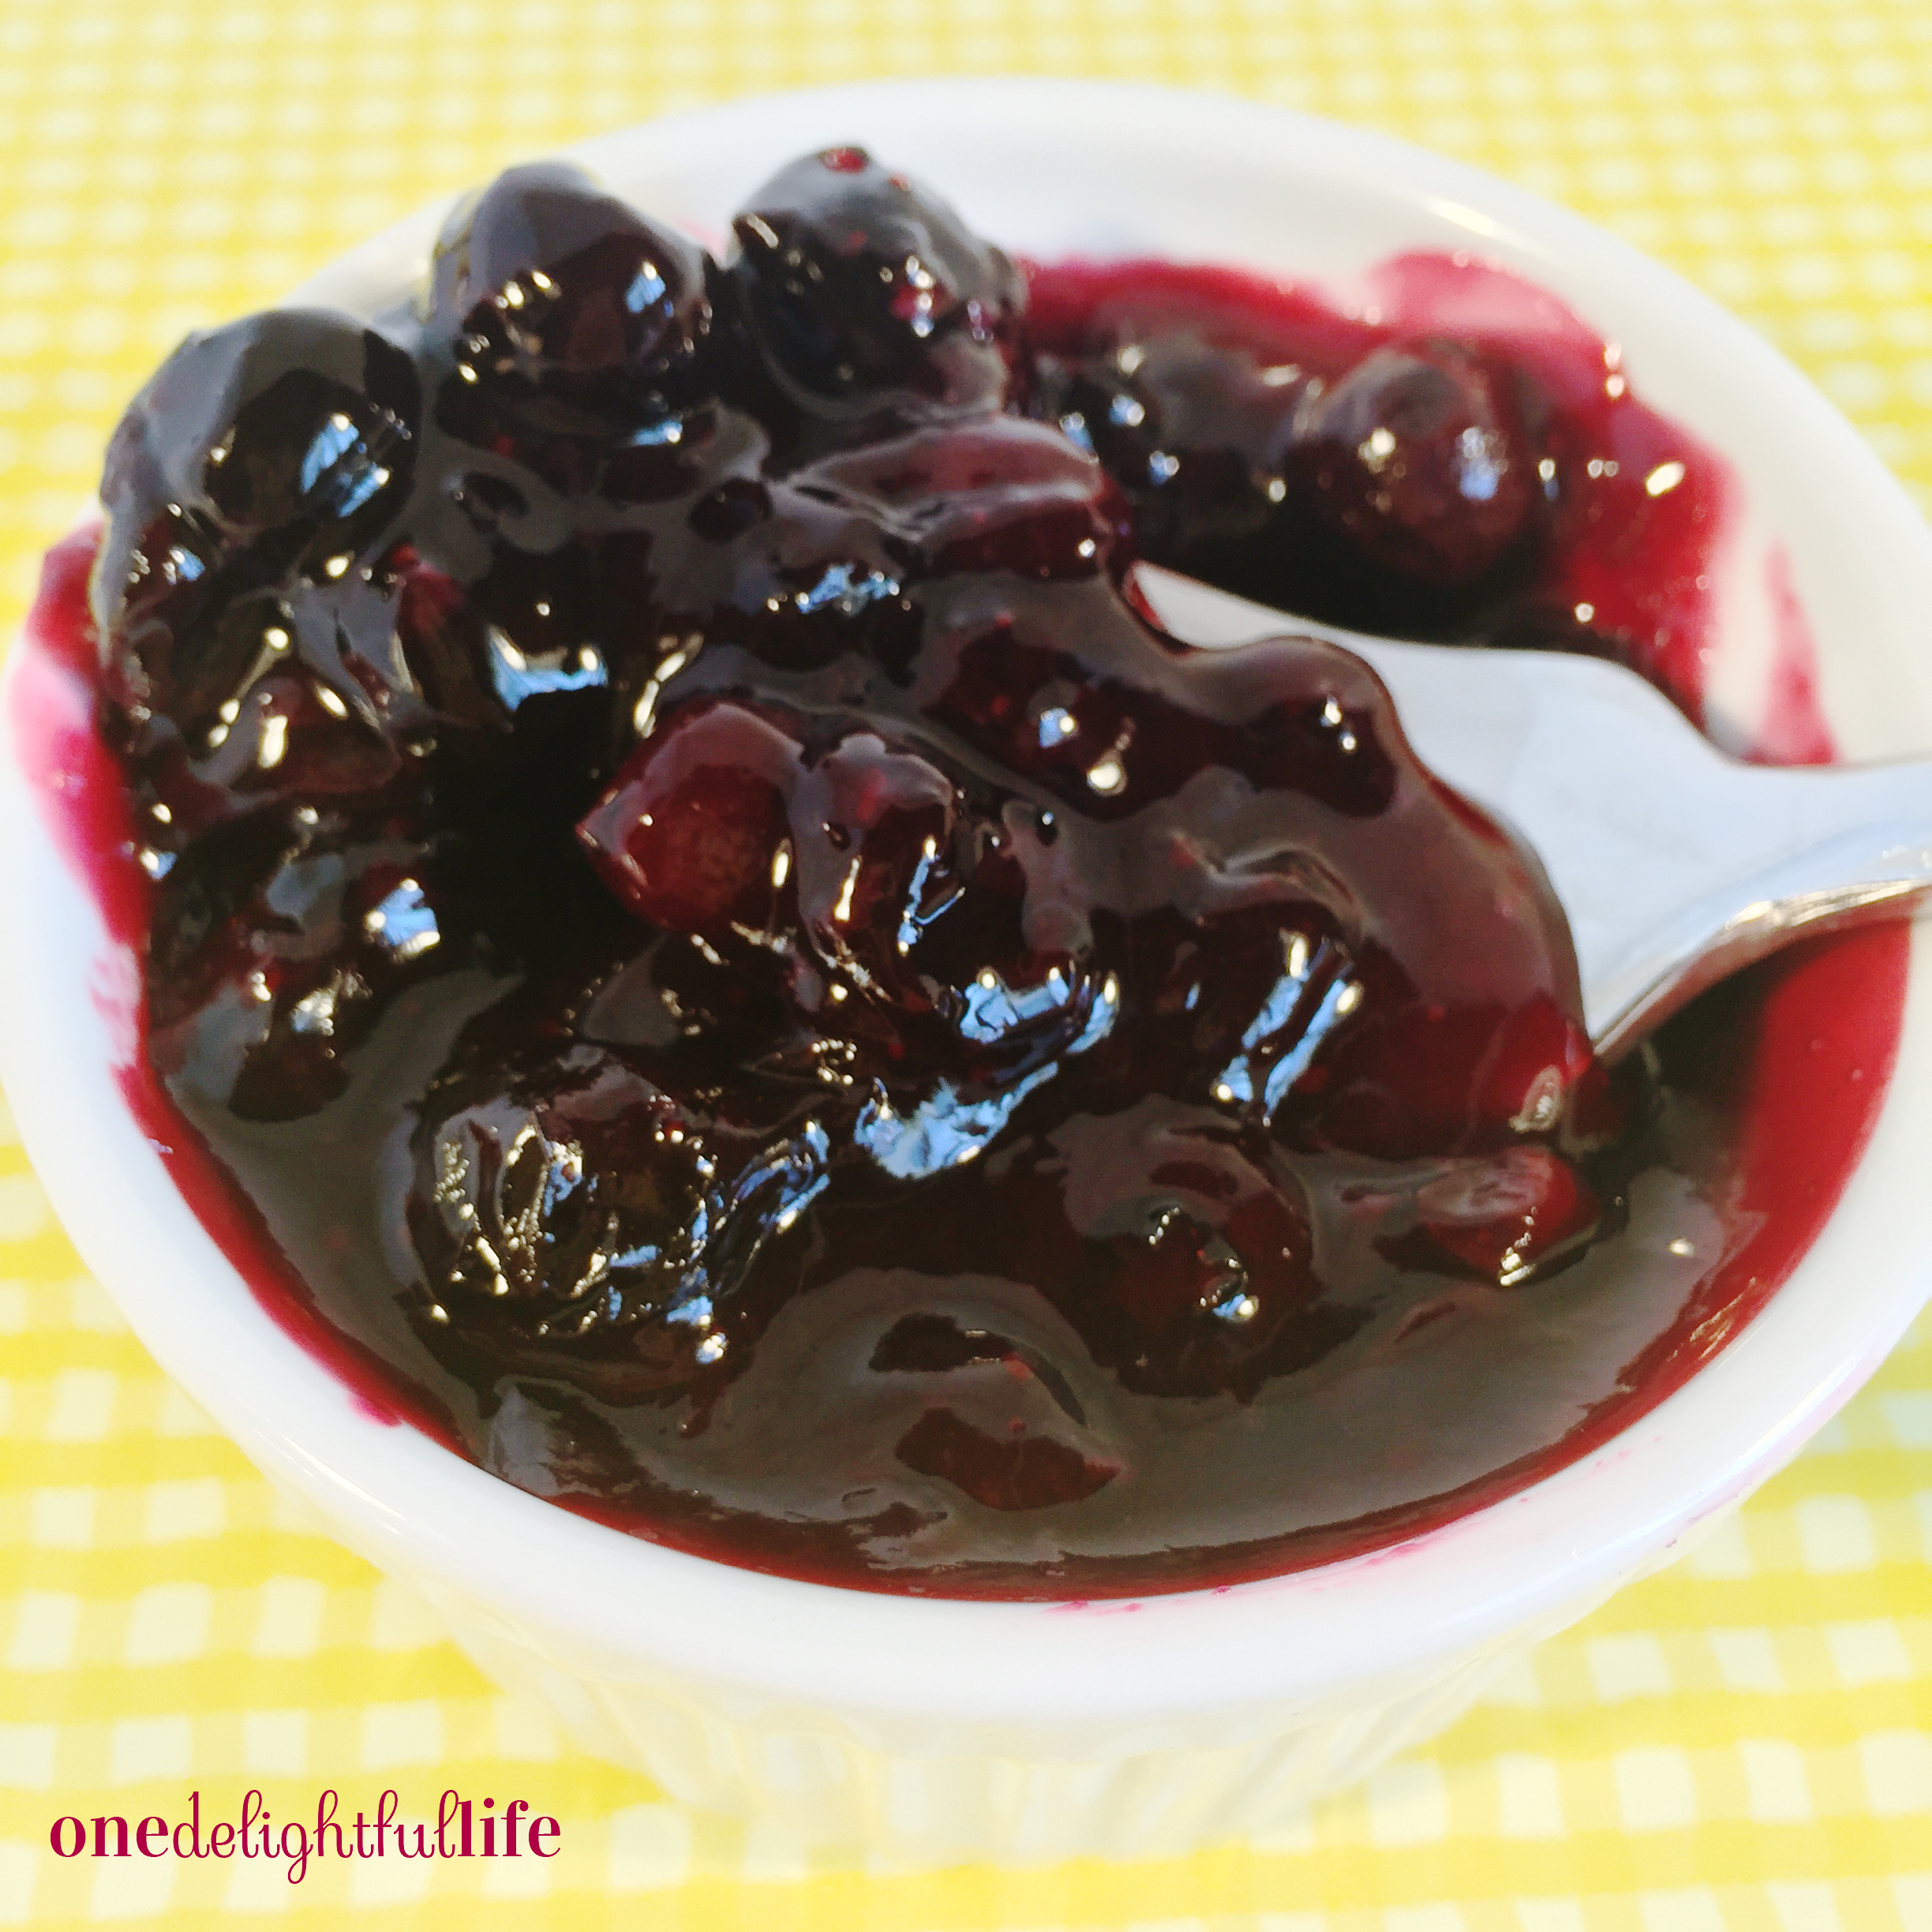 Extra blueberry sauce is an ideal compliment to buttermilk pancakes, muffins, or on top of your overnight oats.